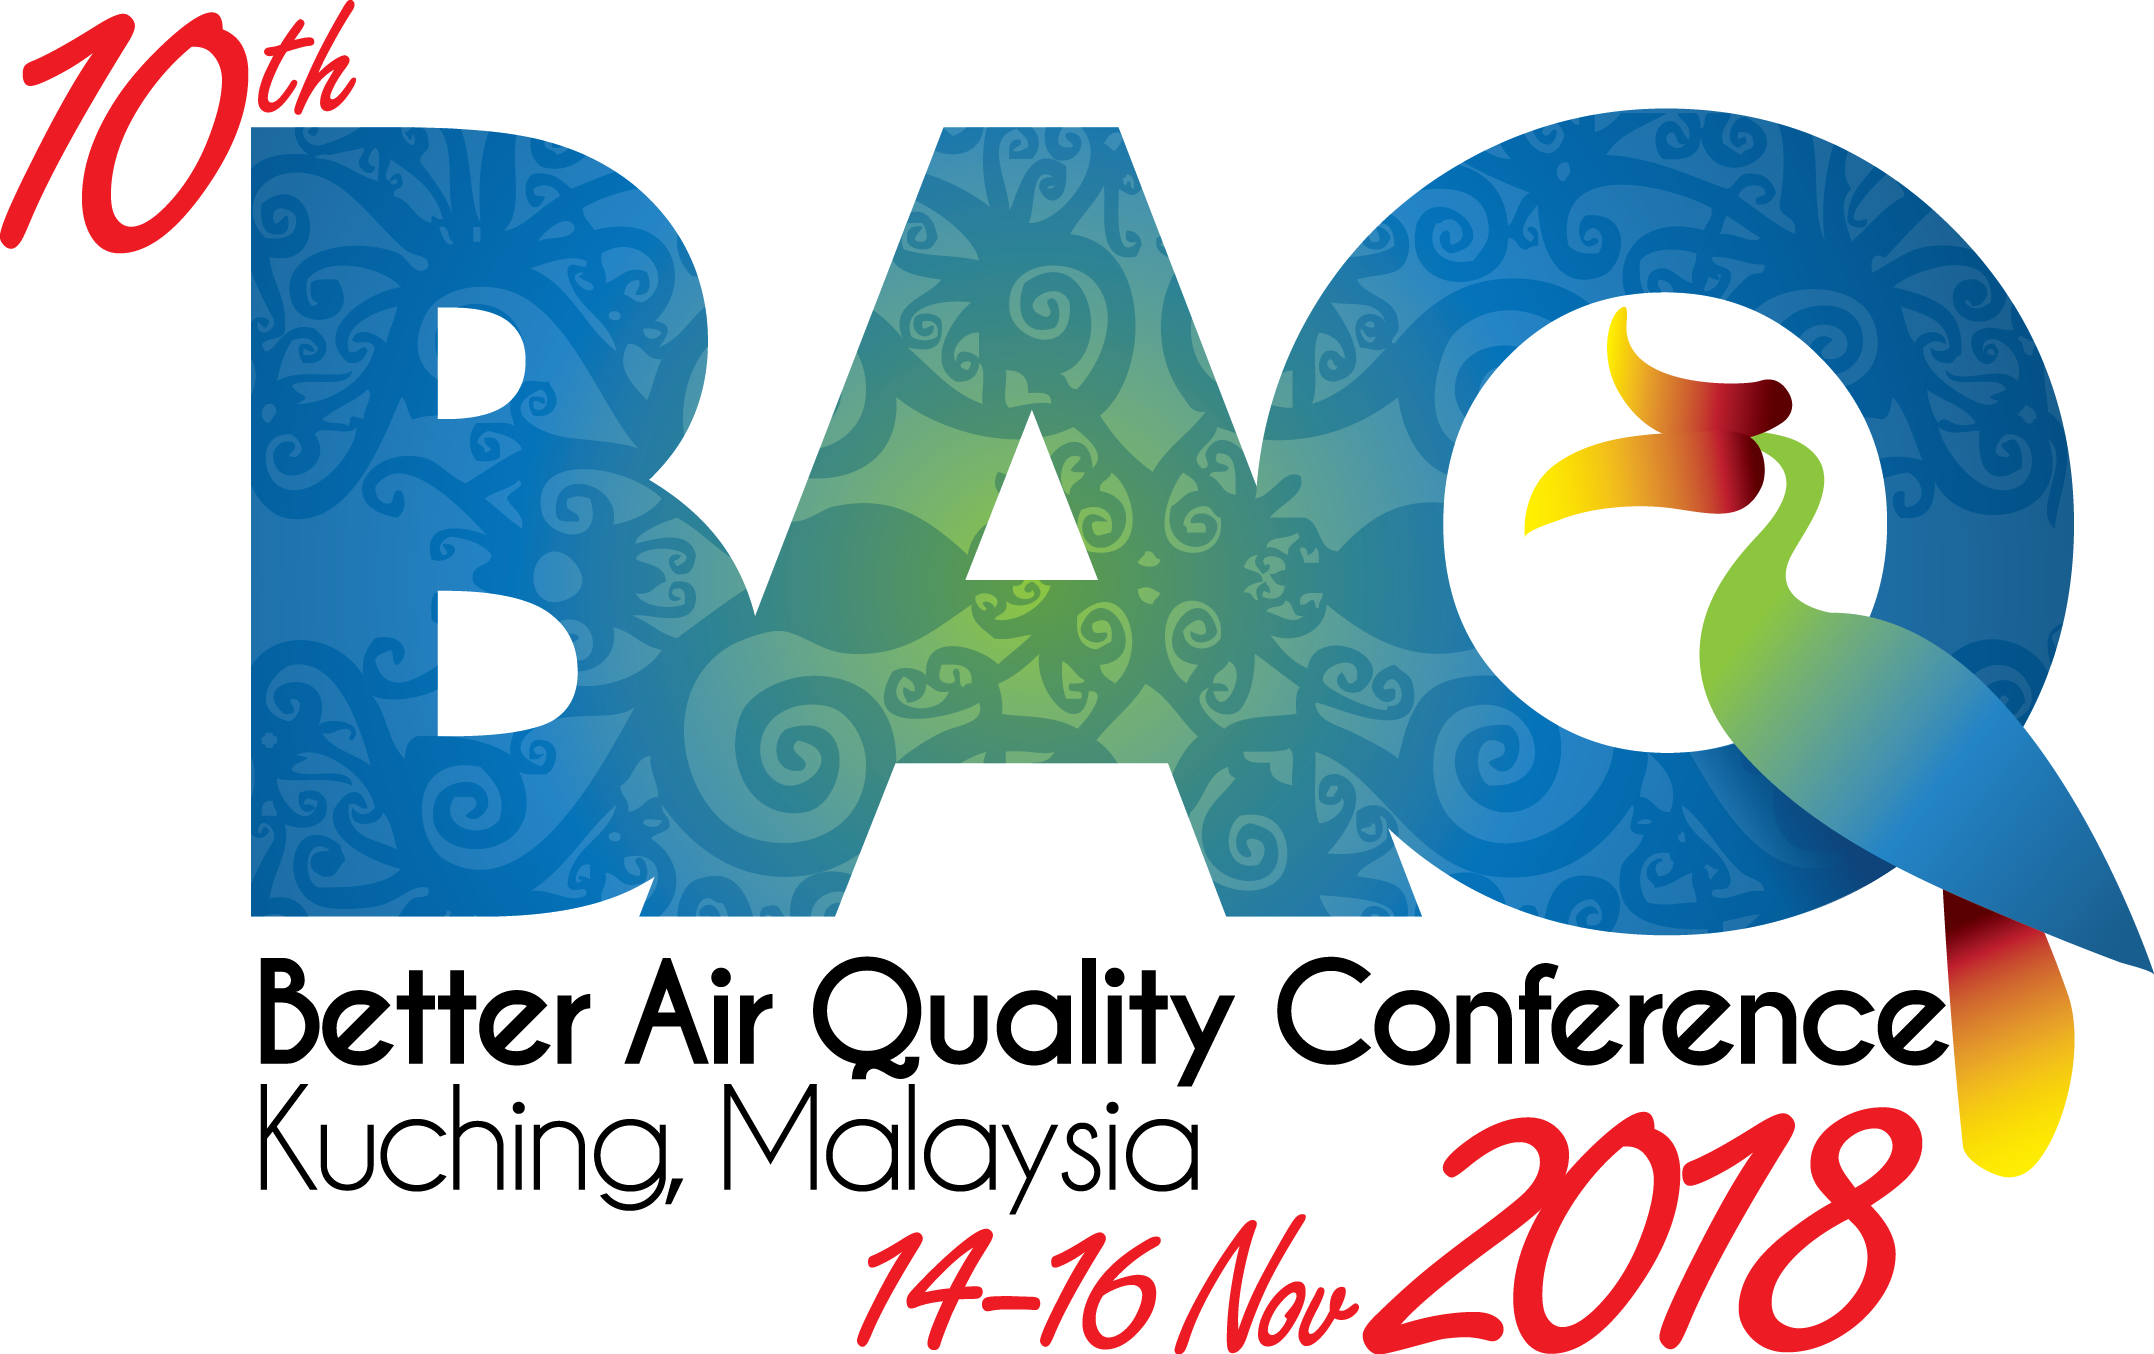 10th Better Air Quality Conference2018 Logo